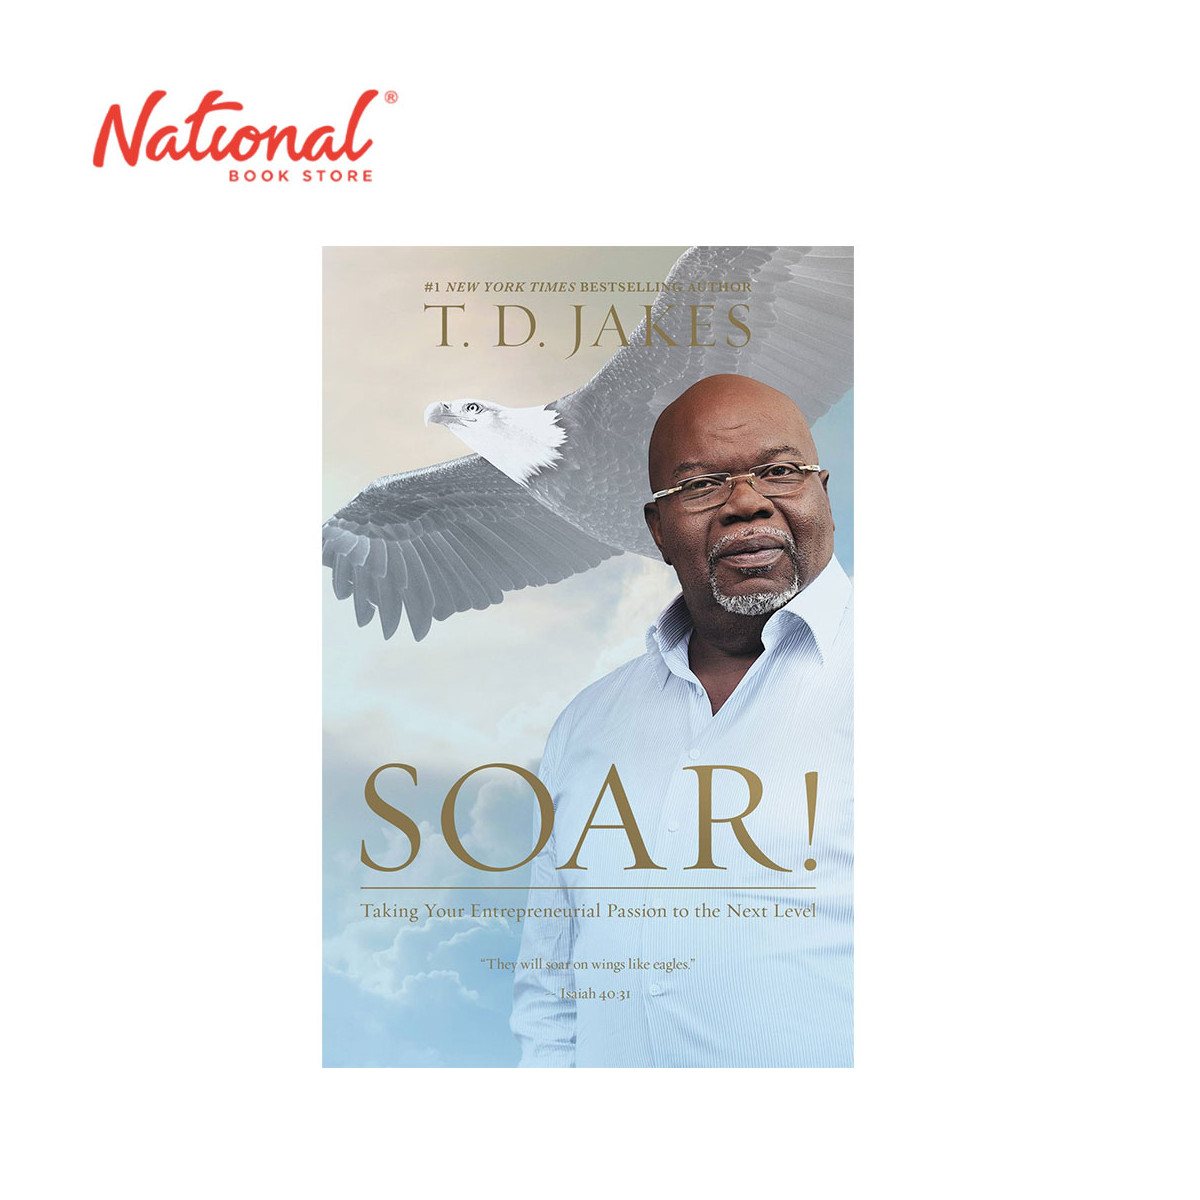 Soar! by T.D. Jakes - Trade Paperback - Inspirational